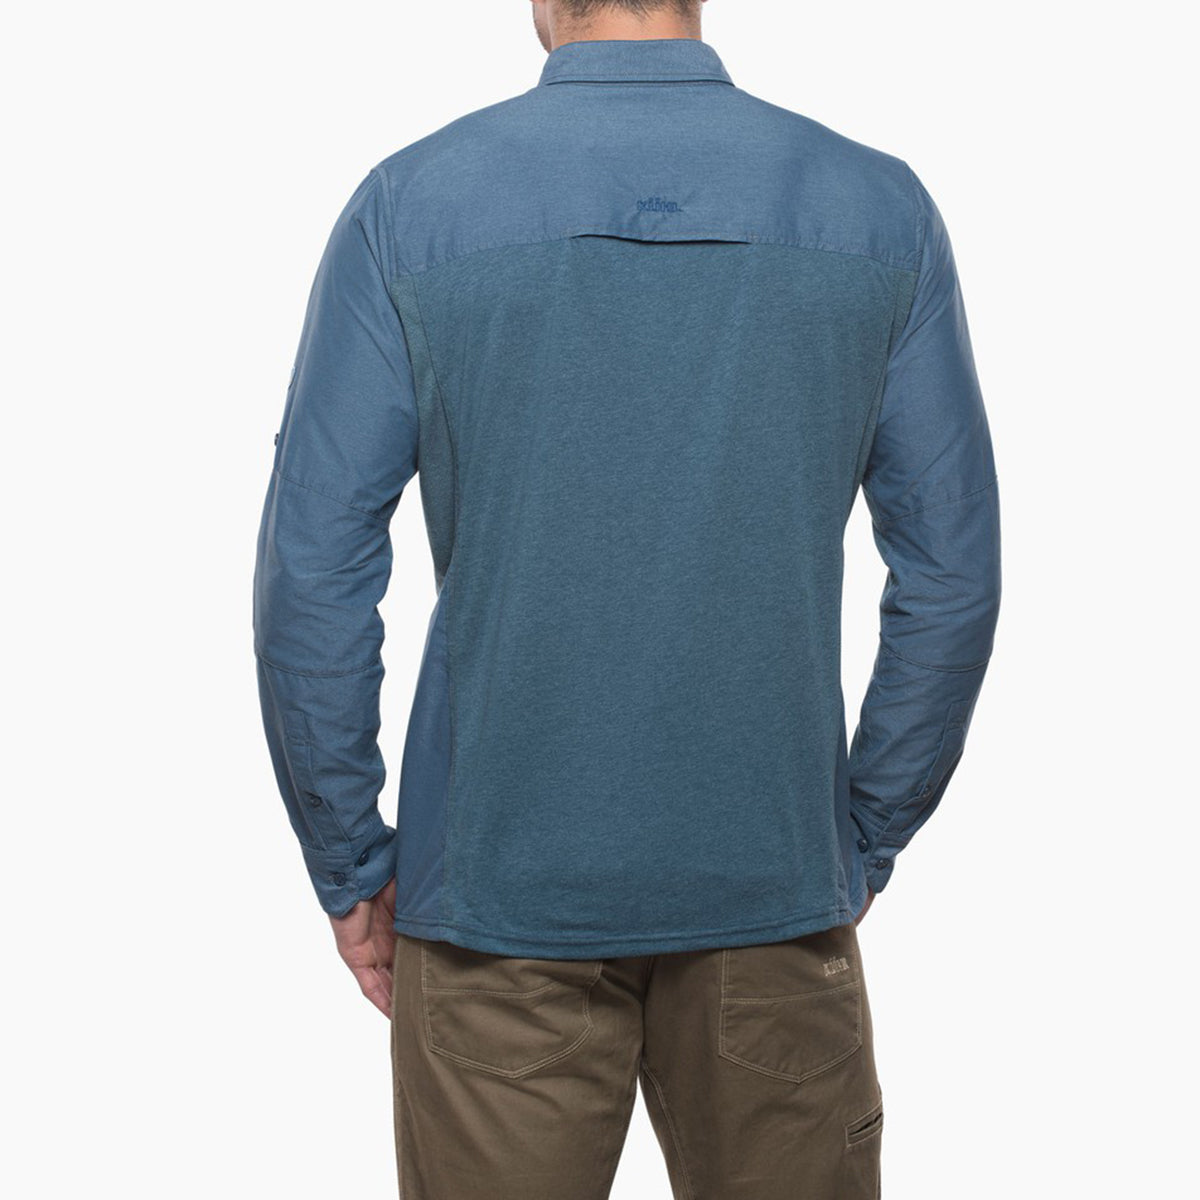 kuhl airspeed sun shirt mens on model back view in color blue